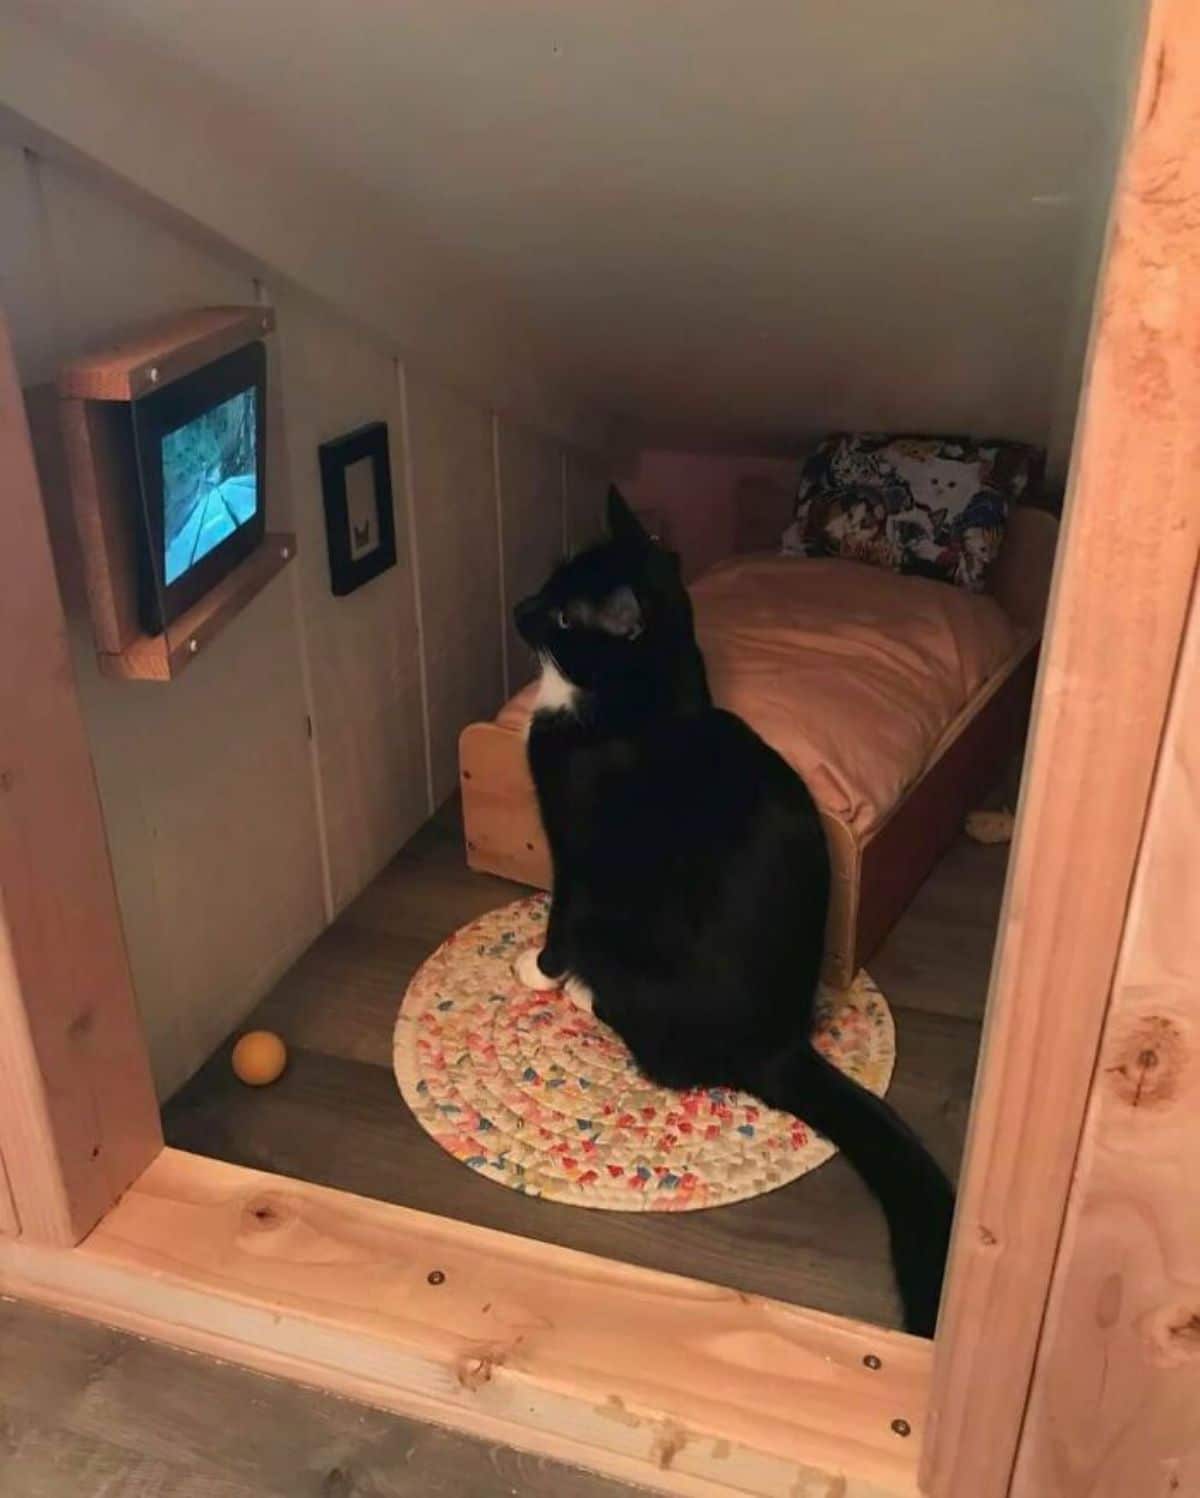 black and white cat with its own room sitting on a rug next to a small bed watching a tablet mounted on the wall